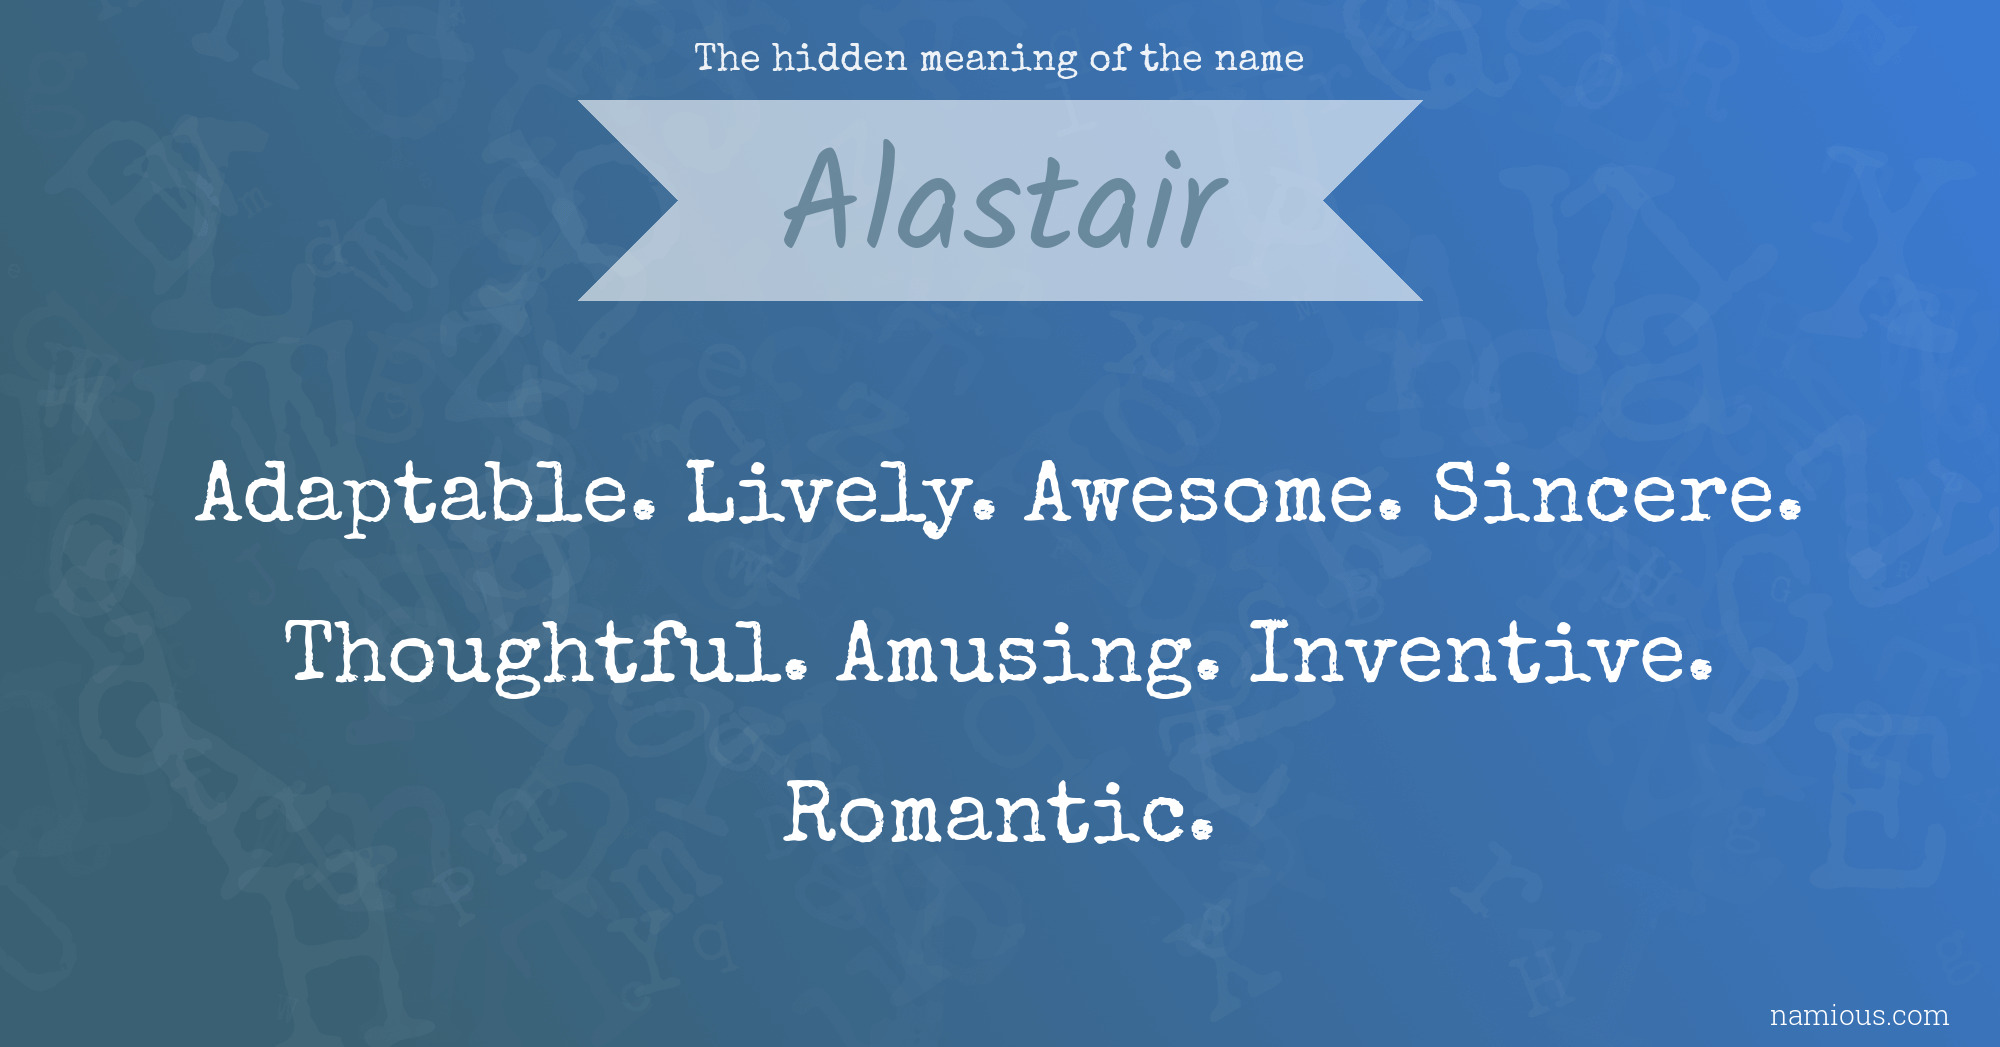 The hidden meaning of the name Alastair